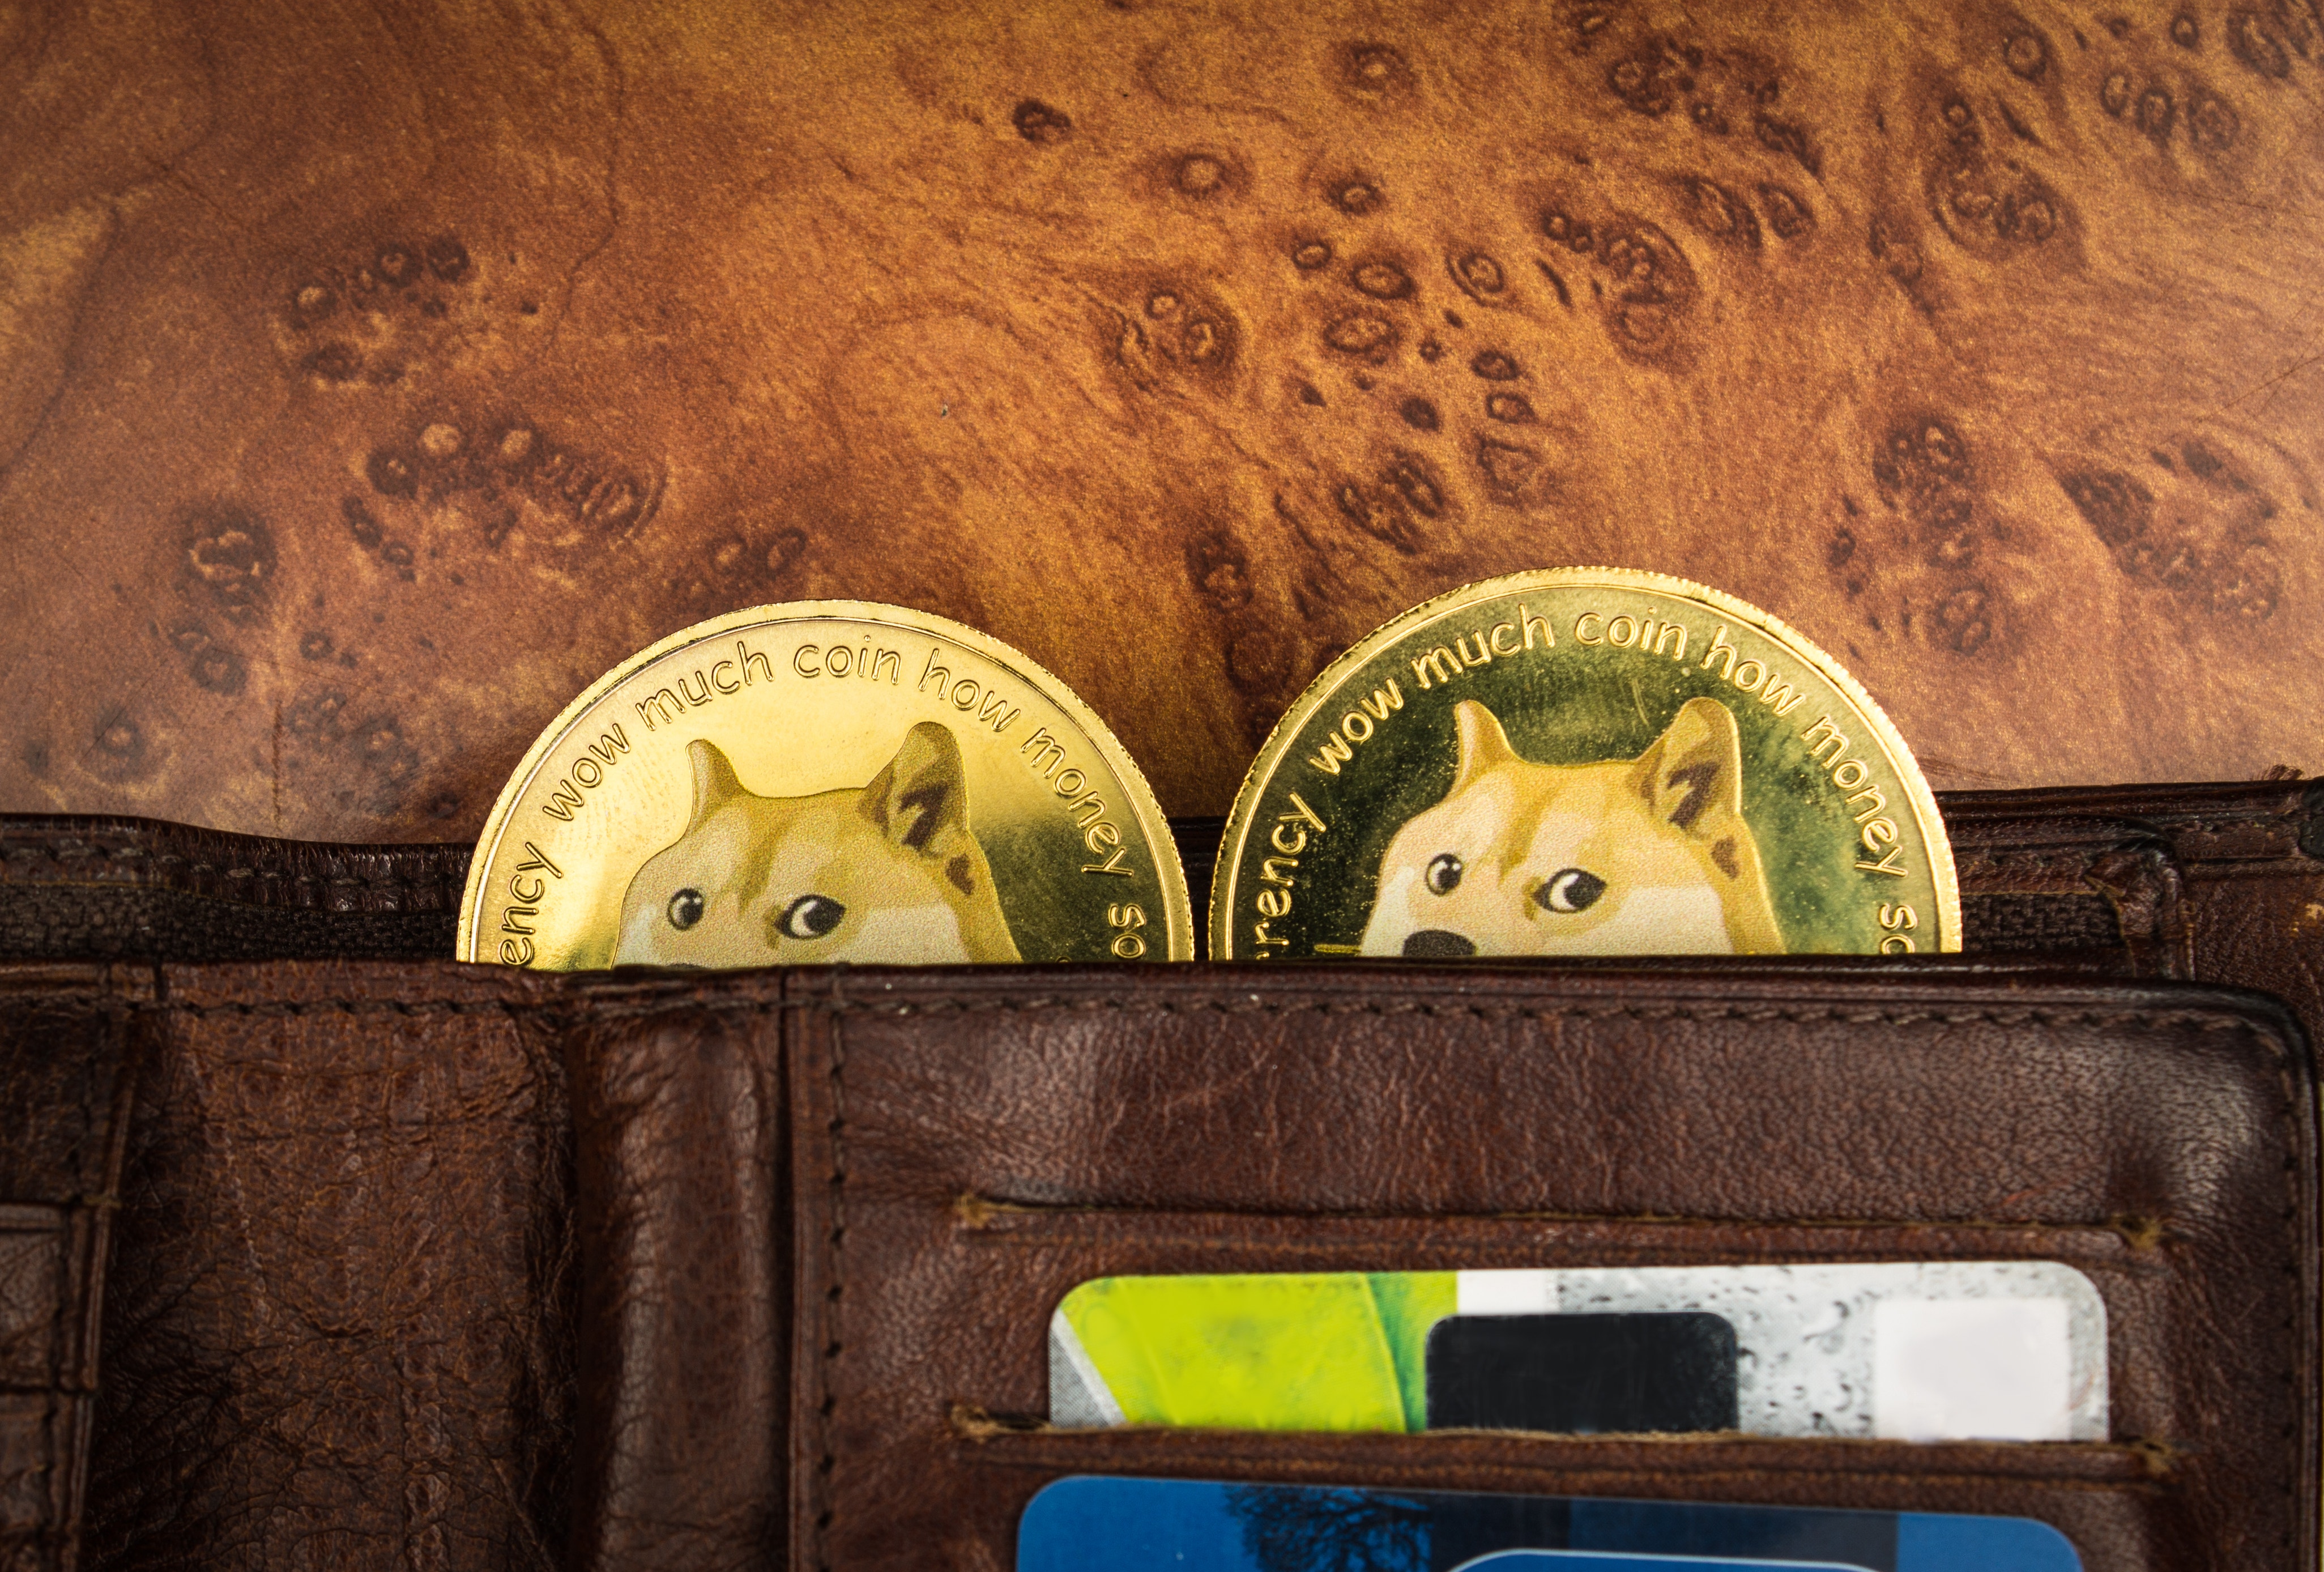 Meme-Coin Civil War? One Dogecoin Co-Founder Says He Has Been Blocked By The Other On Twitter